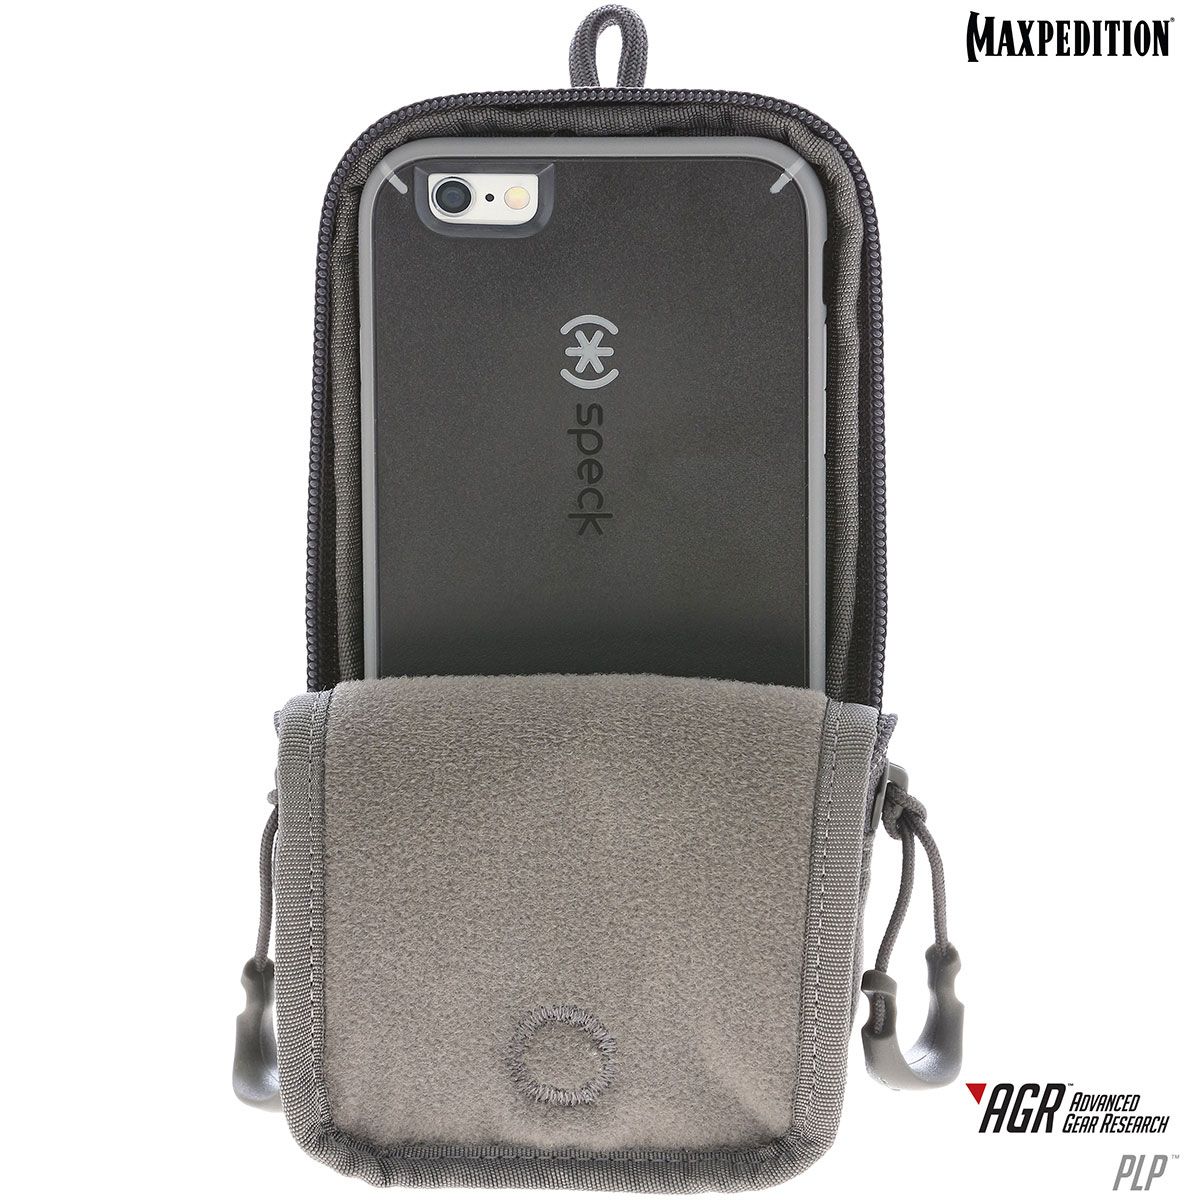 Maxpedition PLPGRY Advanced Gear Research PLP Gray Pouch Fits iPhone 6 Plus 